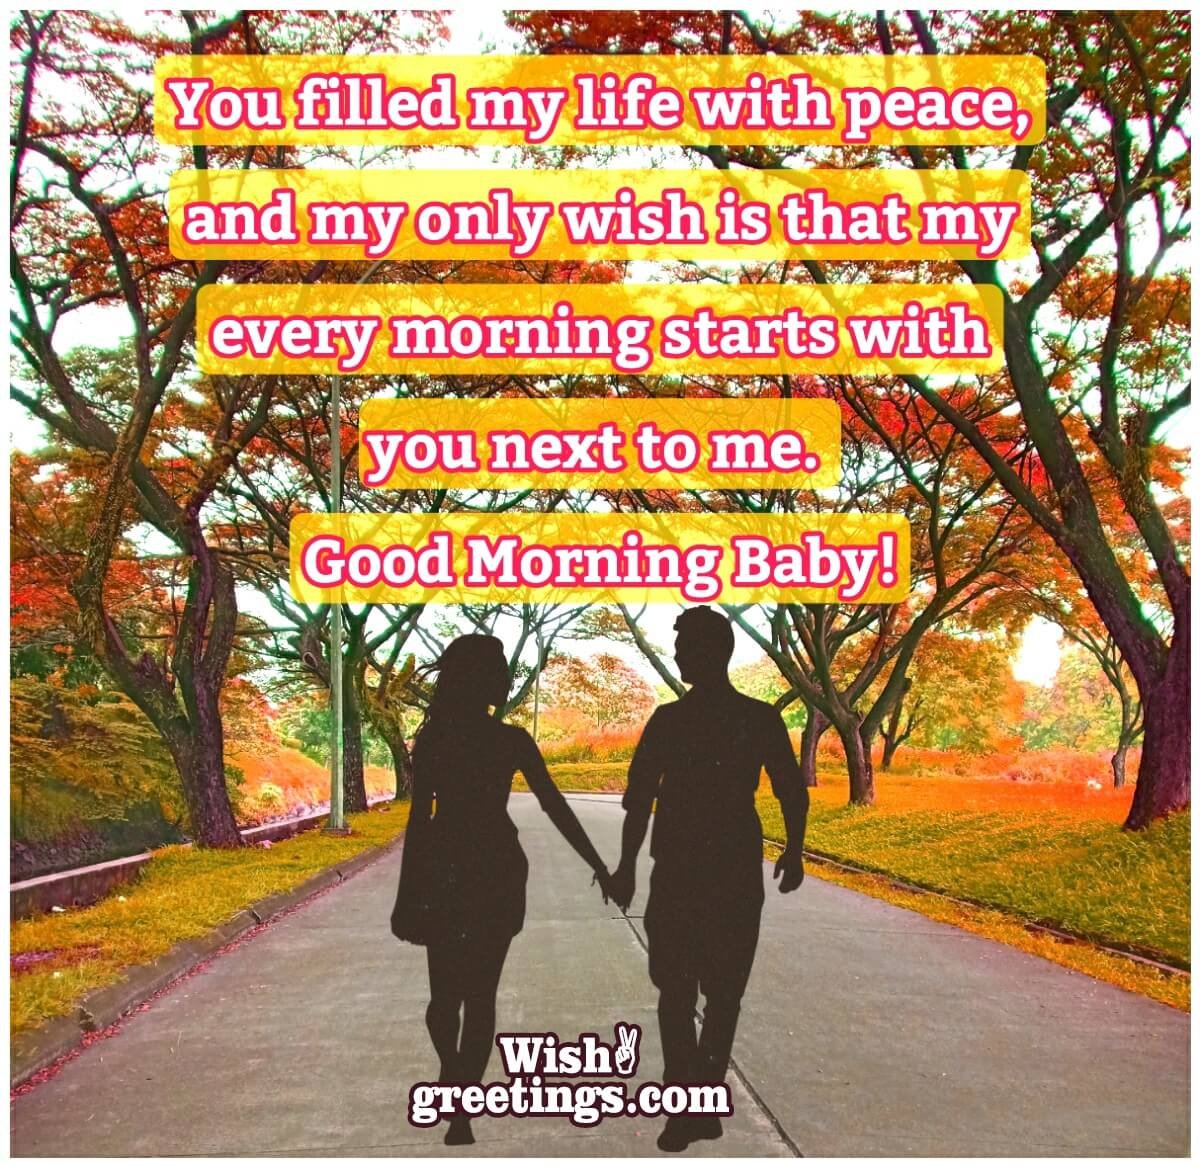 Good Morning Wishes for Wife - Wish Greetings